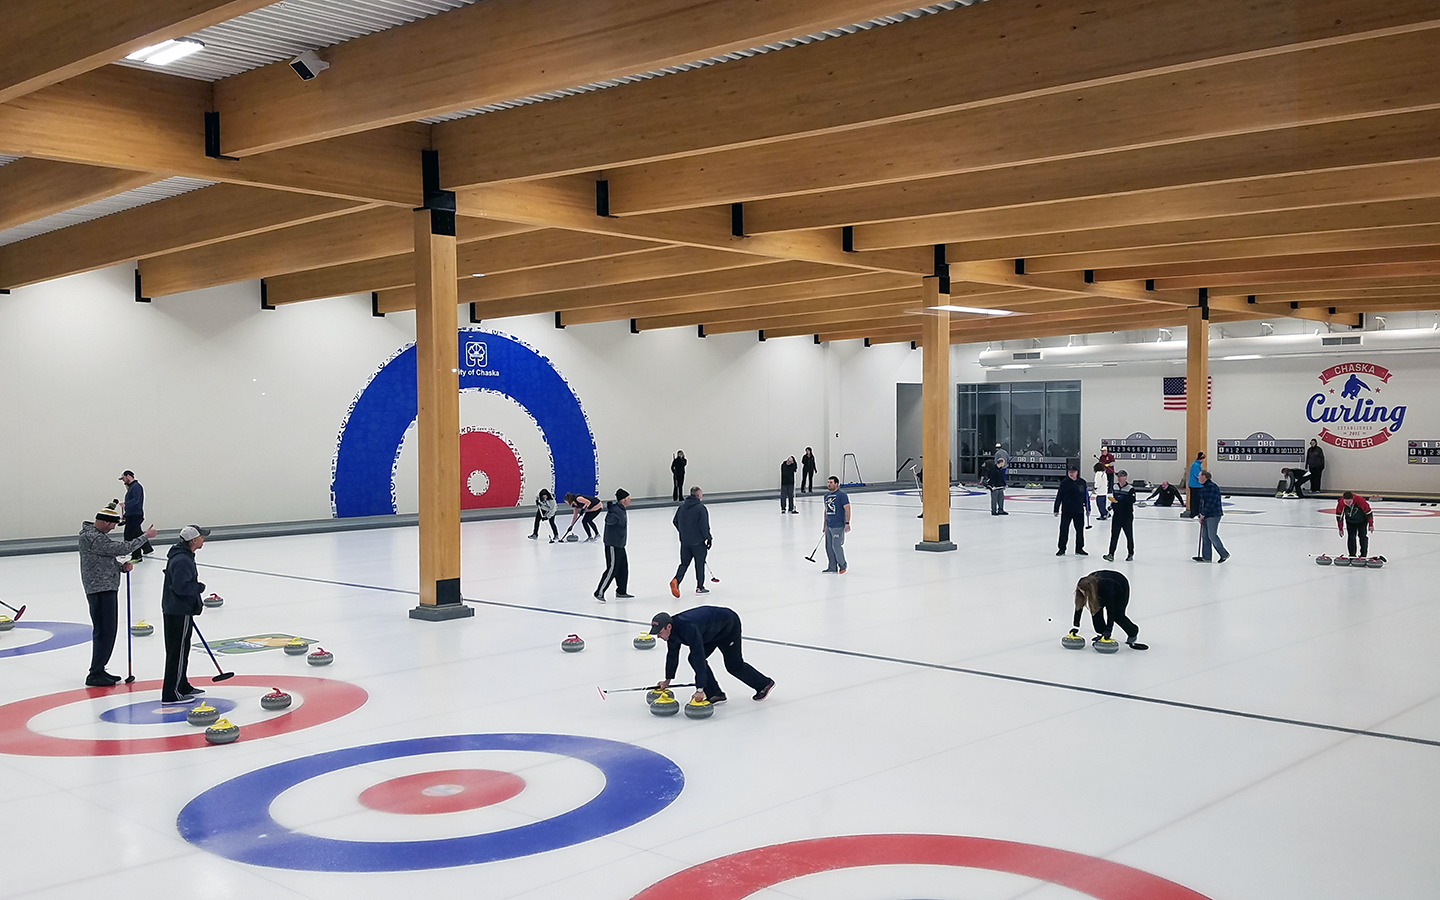 5-14-082_Chaska Event Center_Curling Center 08 – Curling_PW